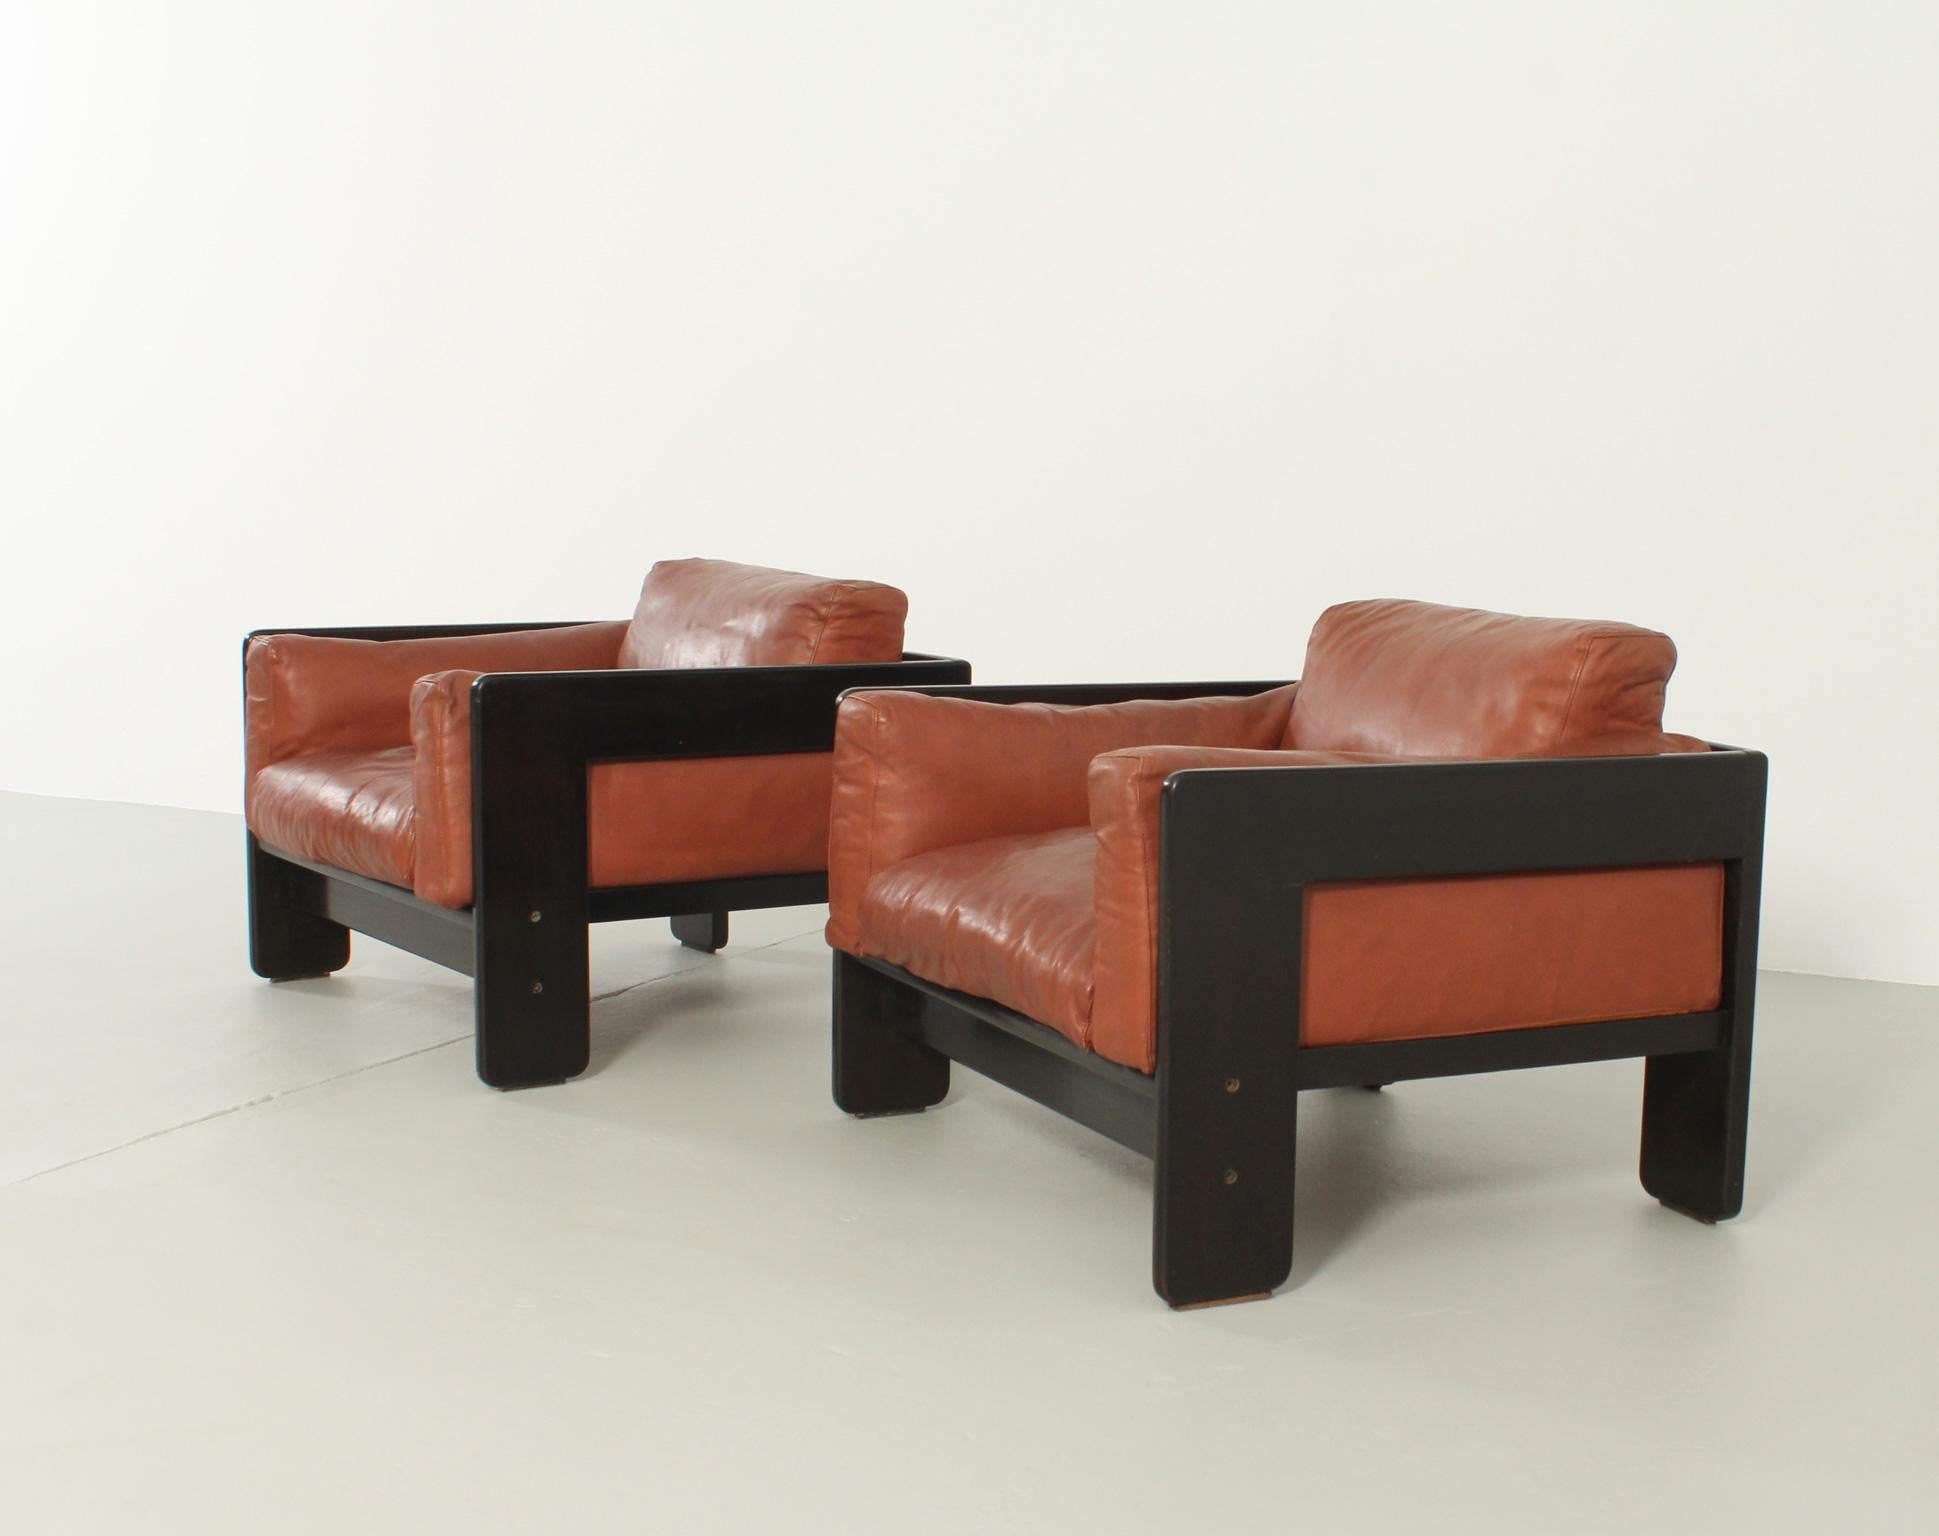 Pair of Bastiano Armchairs by Tobia Scarpa for Gavina, 1960 For Sale 3